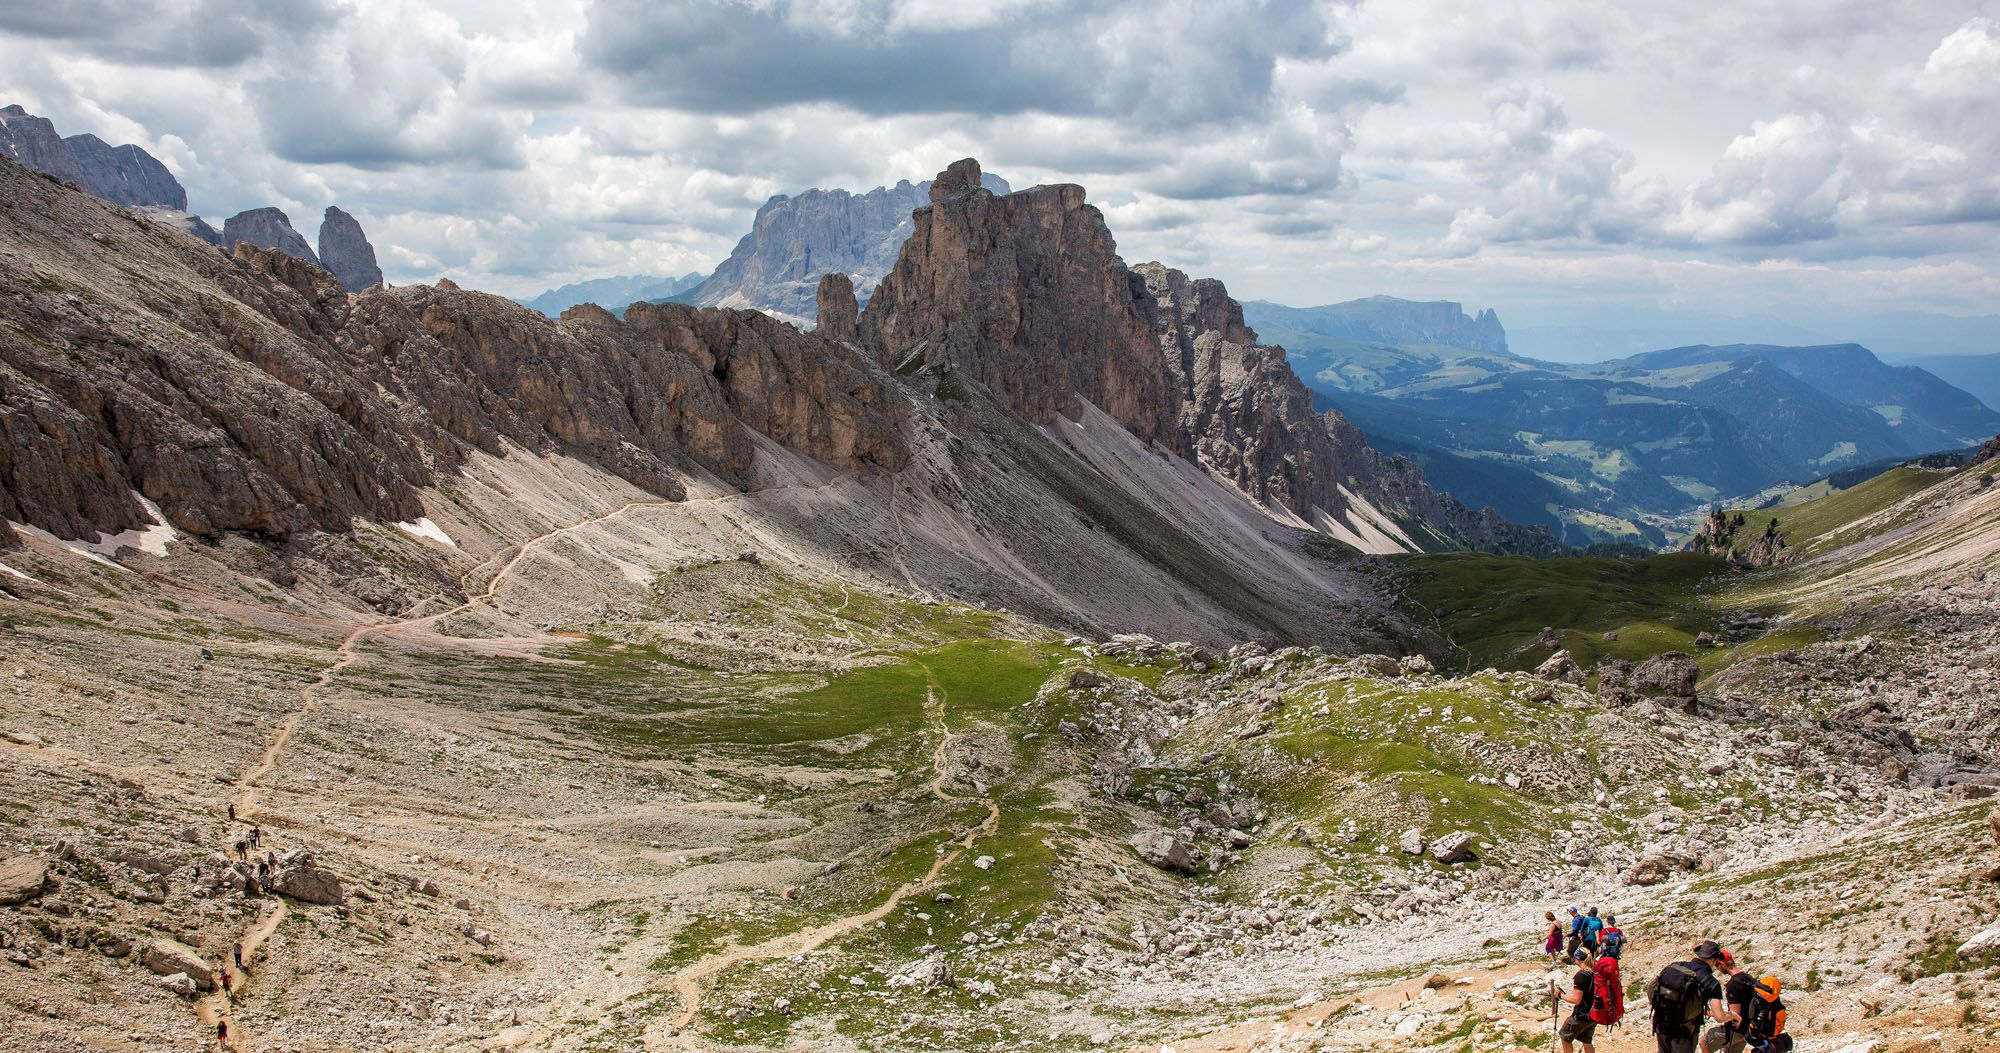 Featured image for “How to Hike the Puez-Odle Altopiano Trail in the Dolomites”